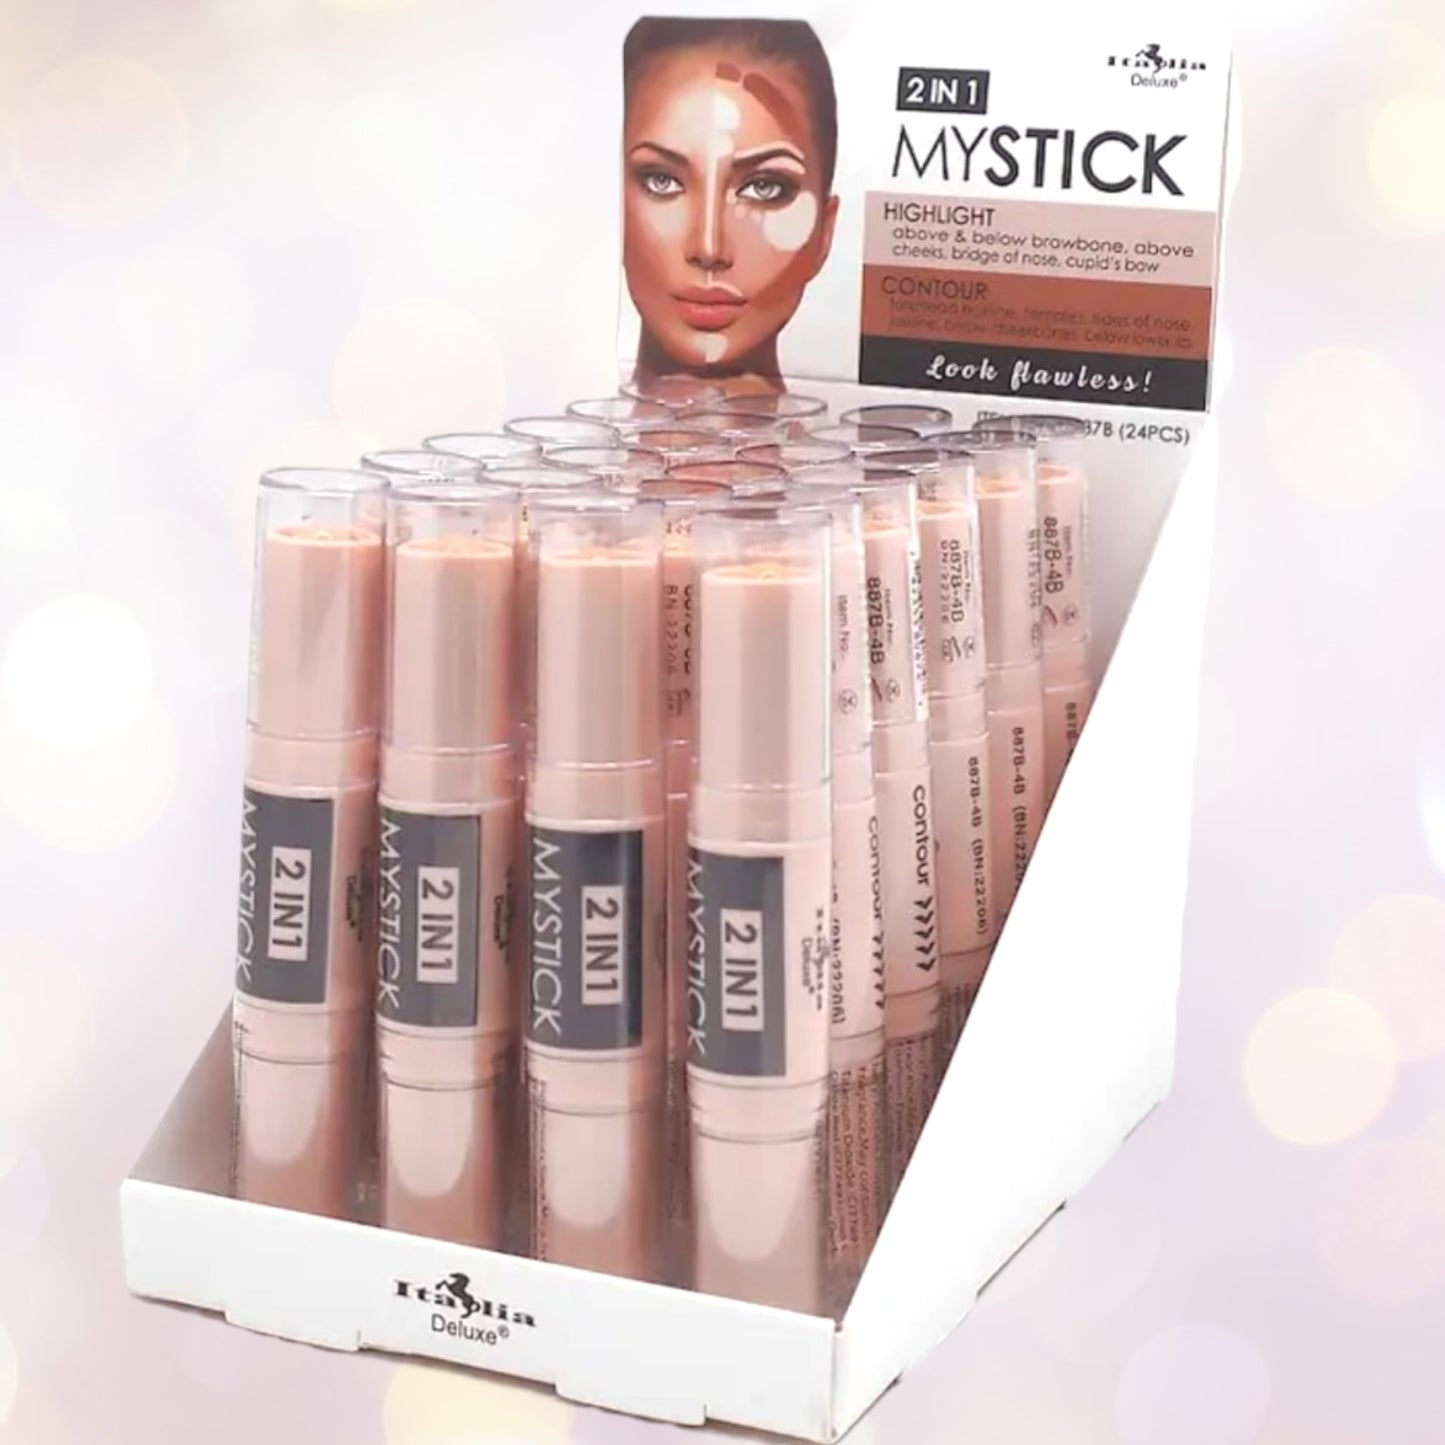 2 in 1 My Stick - Highlight & Contour